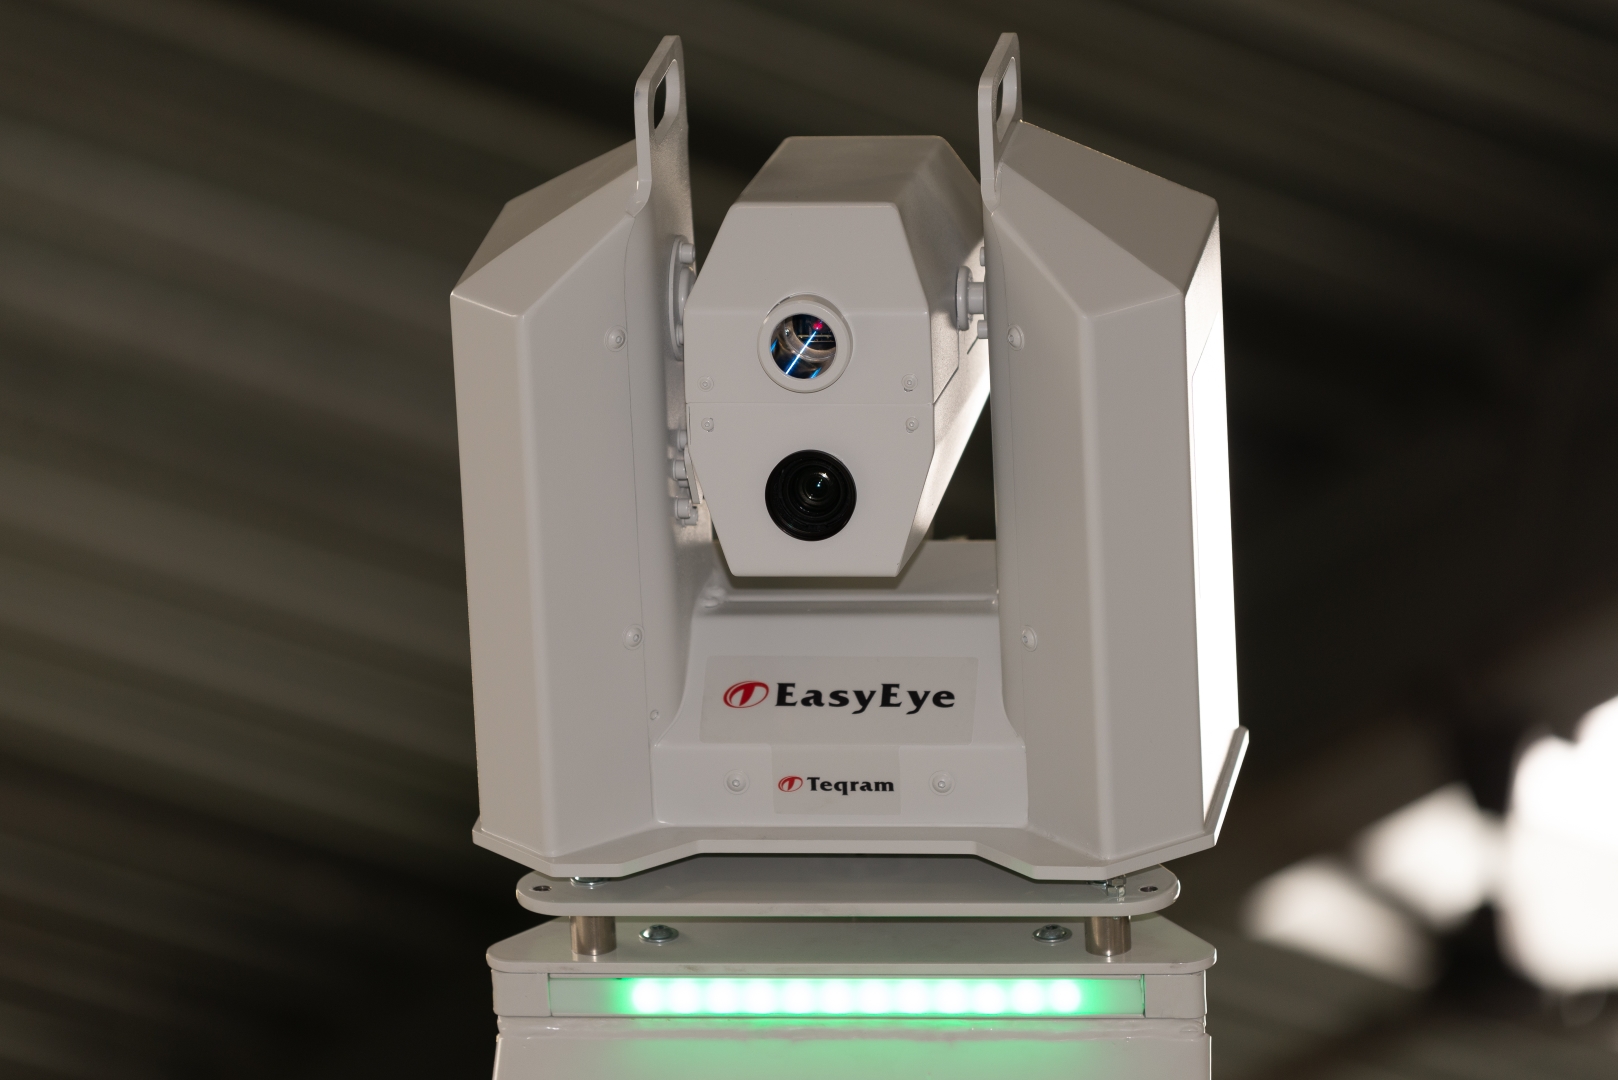 Pallets, stacks and blanks are automatically detected by the EasyEye 3D vision system in combination with an artificial intelligence-based control system. © Teqram